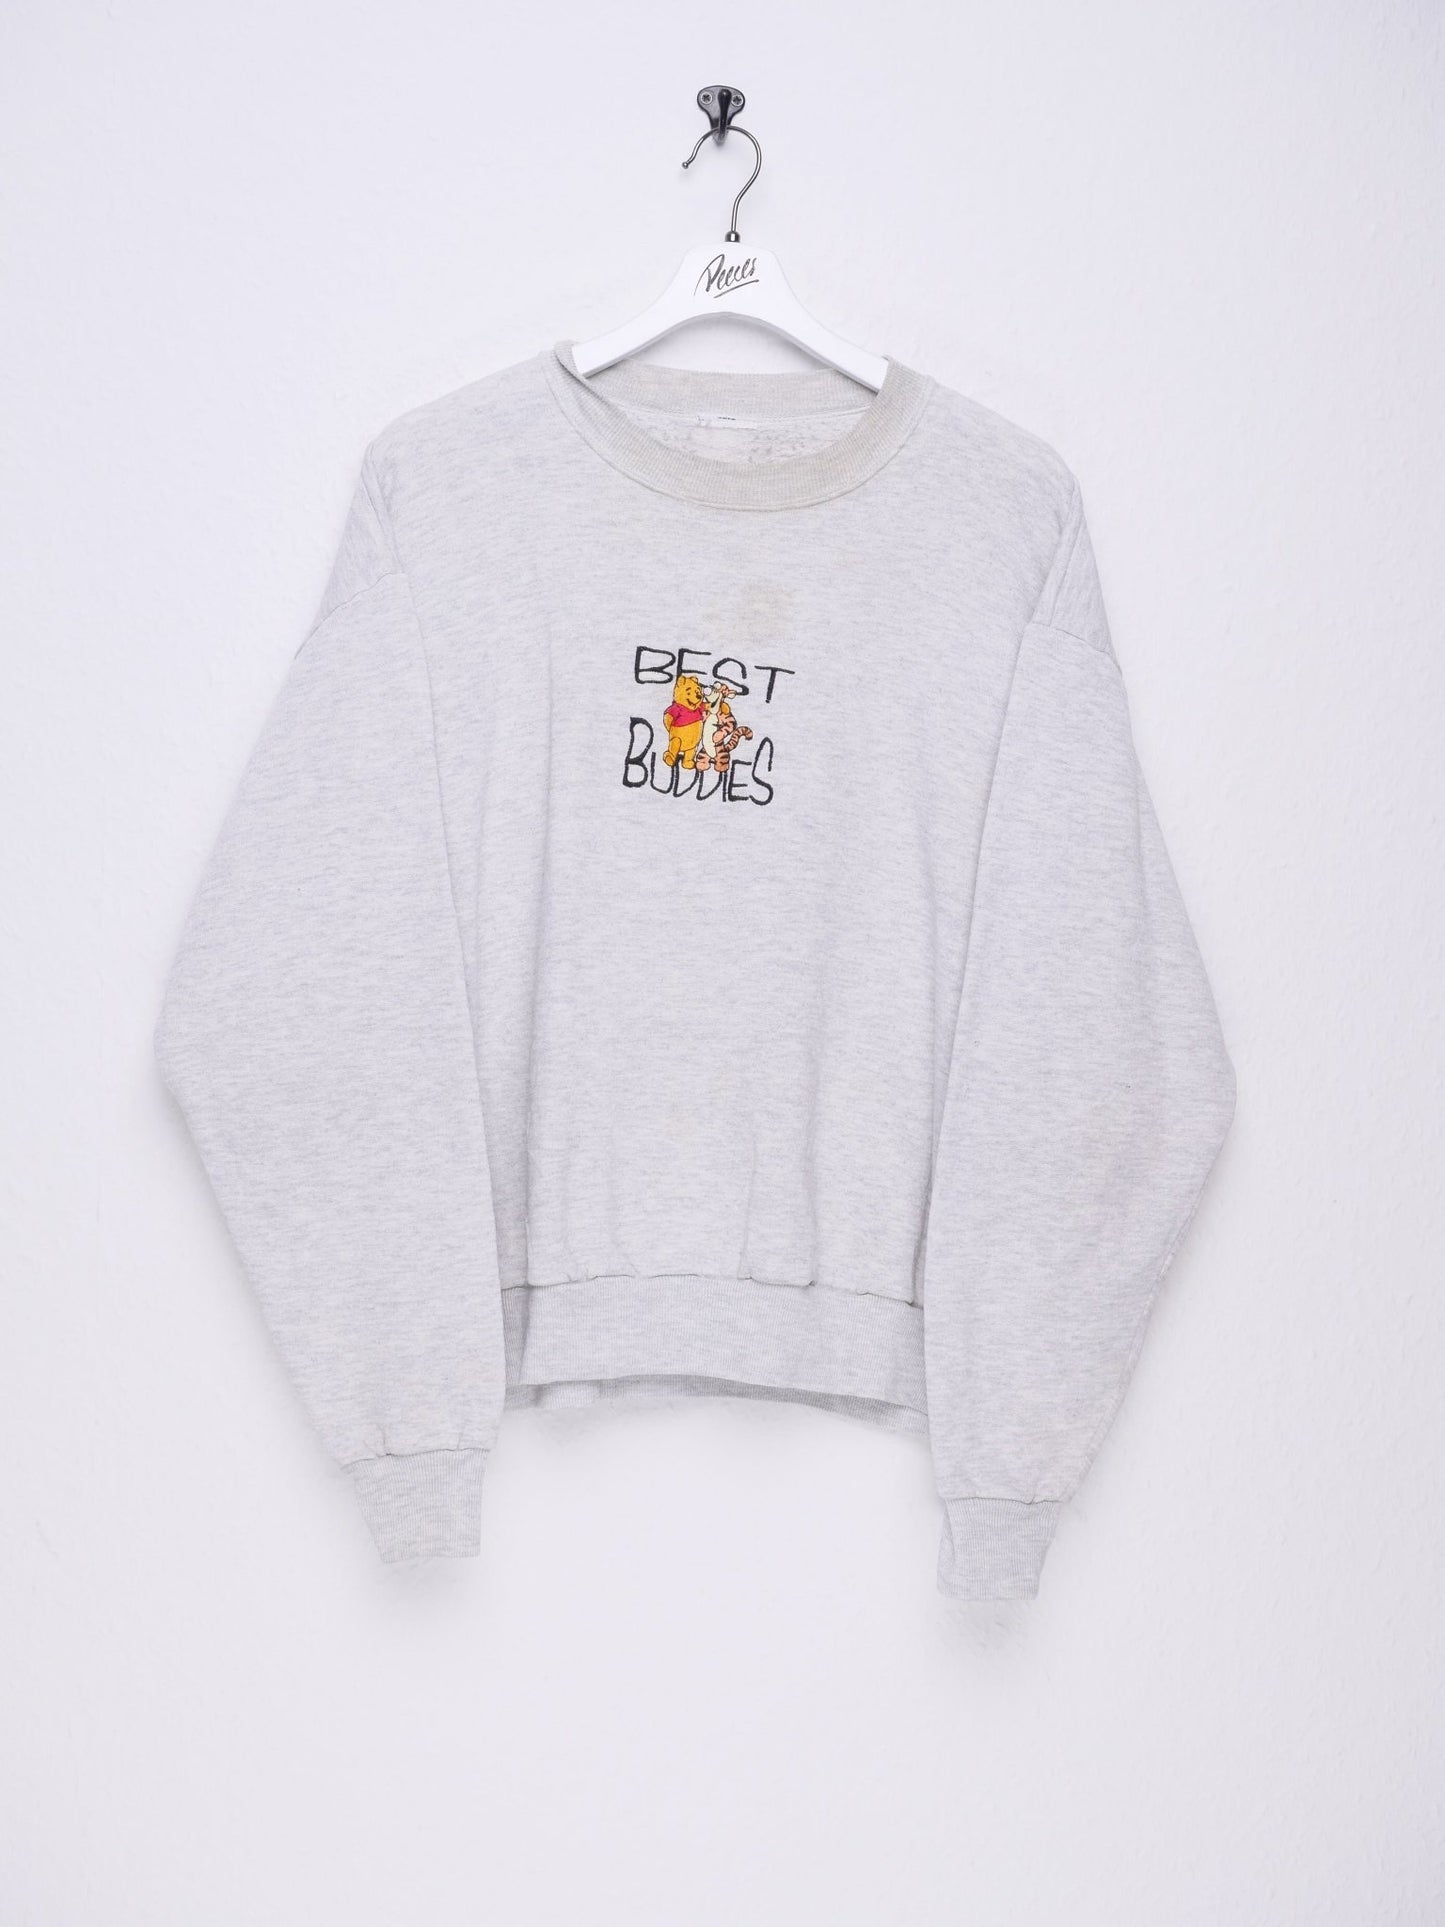 disney 'Best Buddies' embroidered Graphic grey Sweater - Peeces